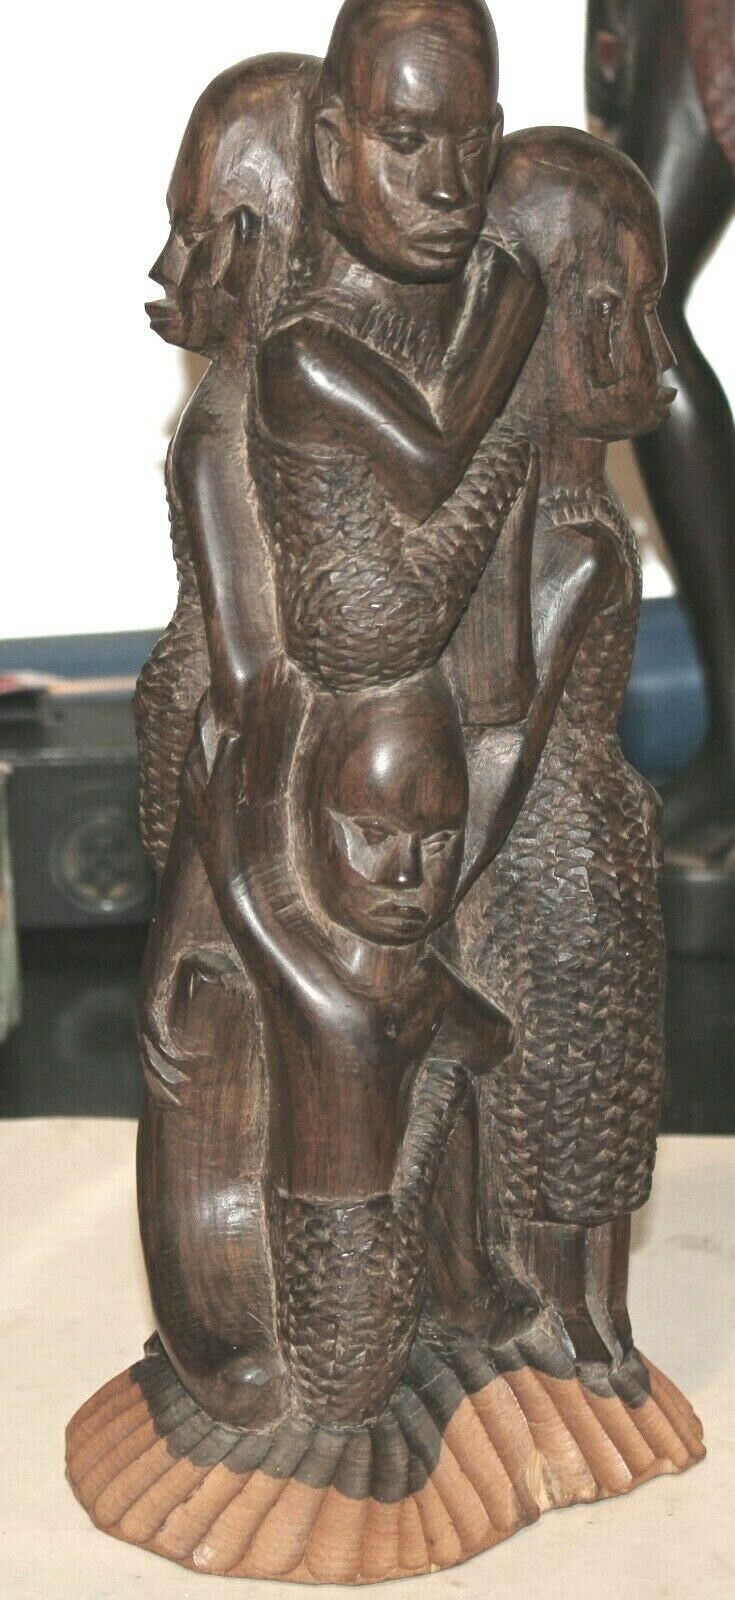 Primary image for Kenya Tribal Art Wood Carving of Family 12"